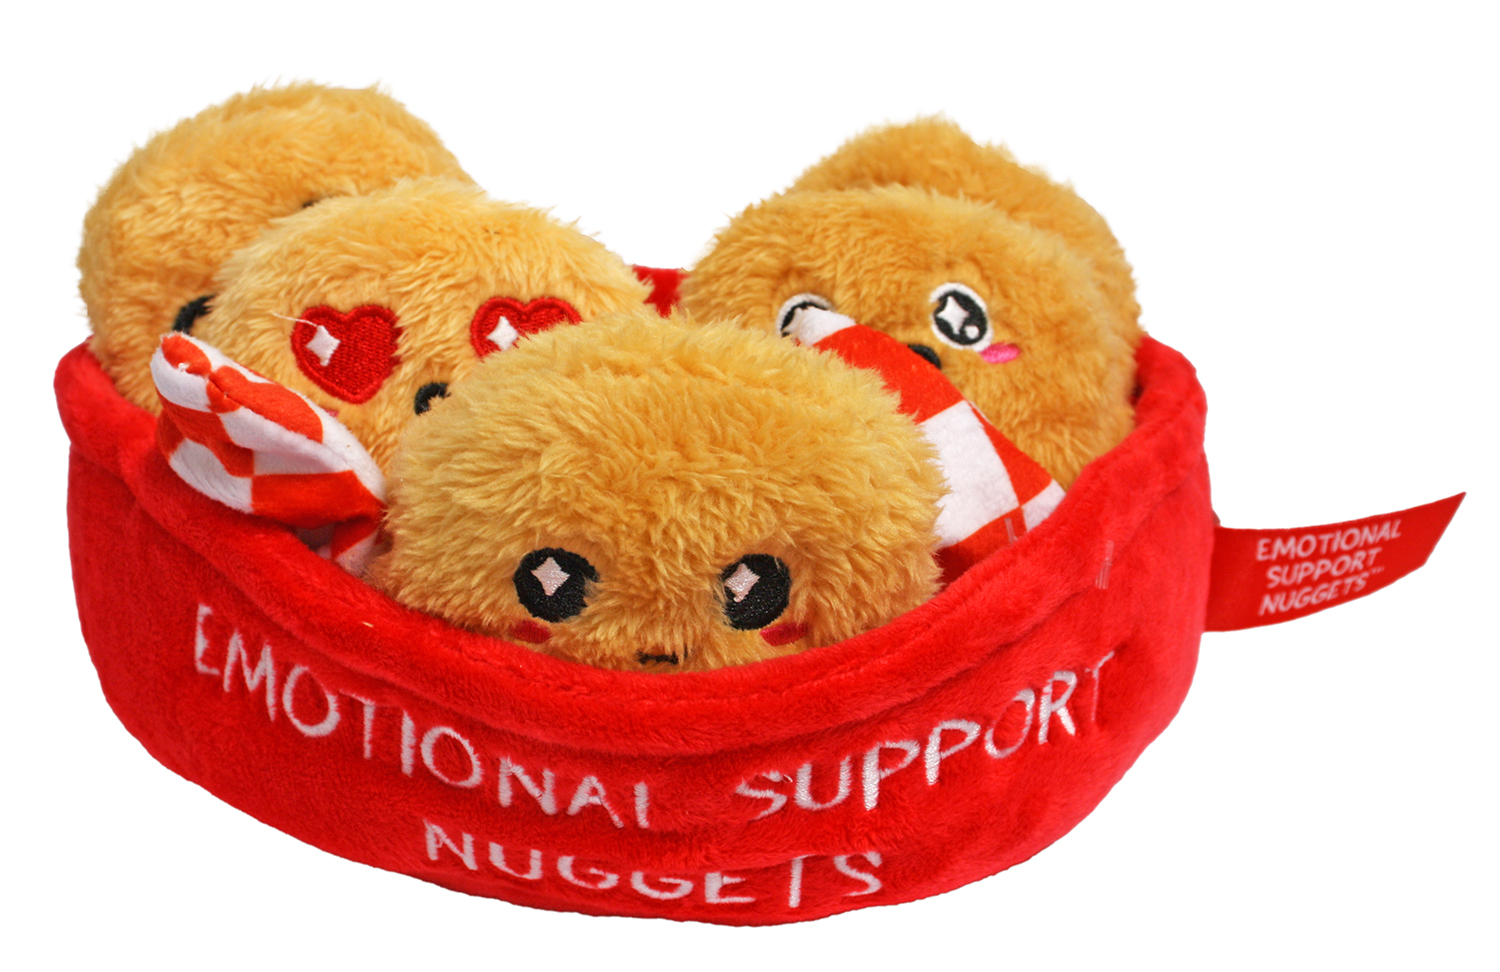 EMOTIONAL SUPPORT - NUGGET PLUSH (4)